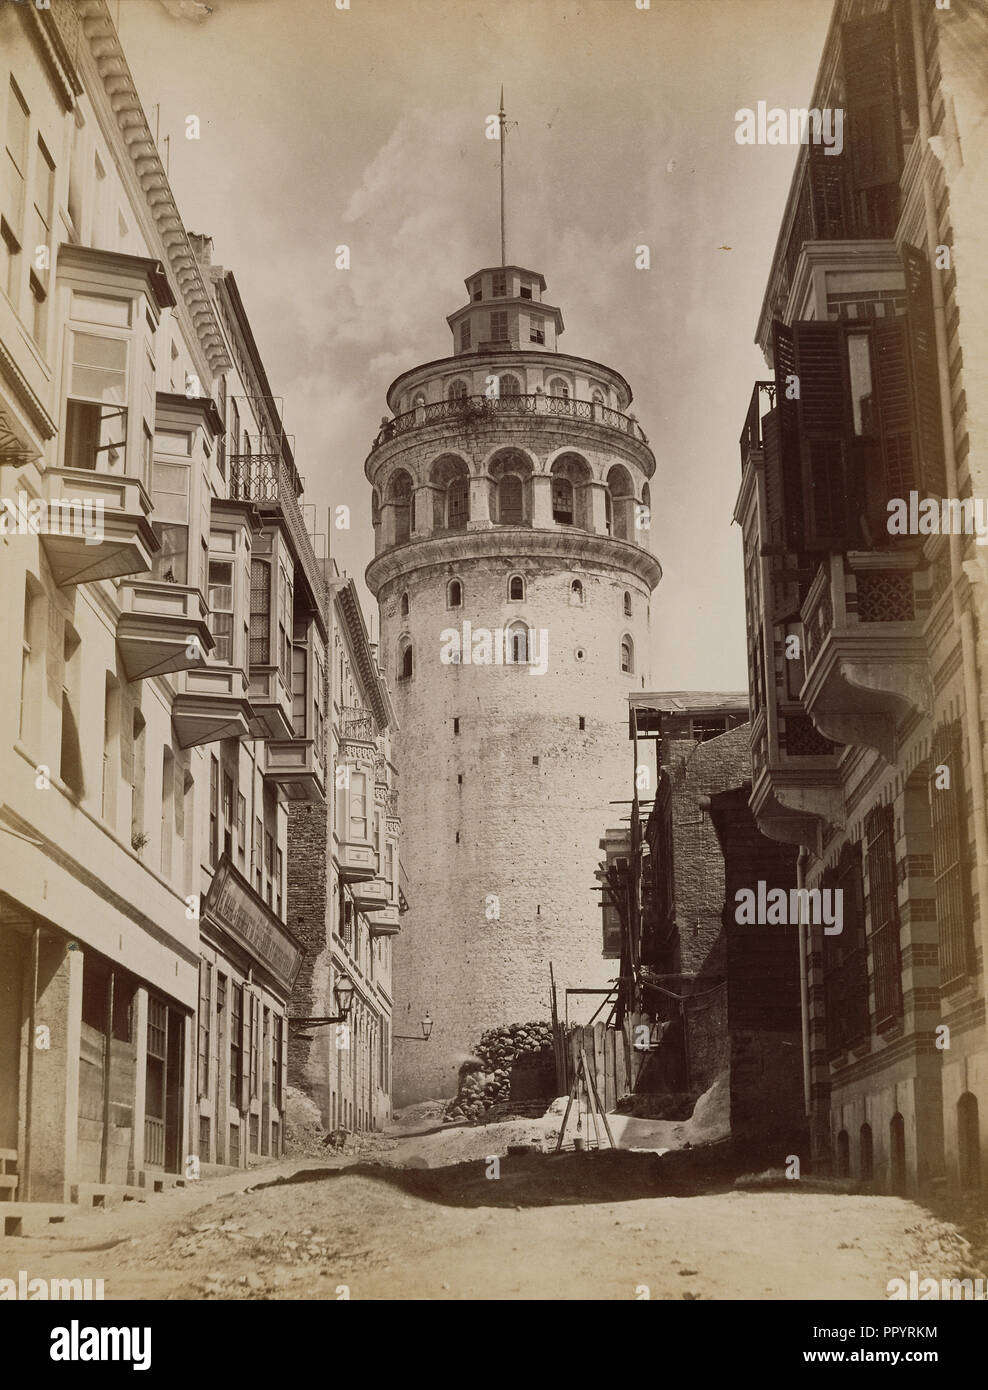 Tower of Galata, Constantinople; Abdullah Frères, Armenian, active 1860s - 1890s, Istanbul, Turkey; 1858 - 1890; Albumen silver Stock Photo